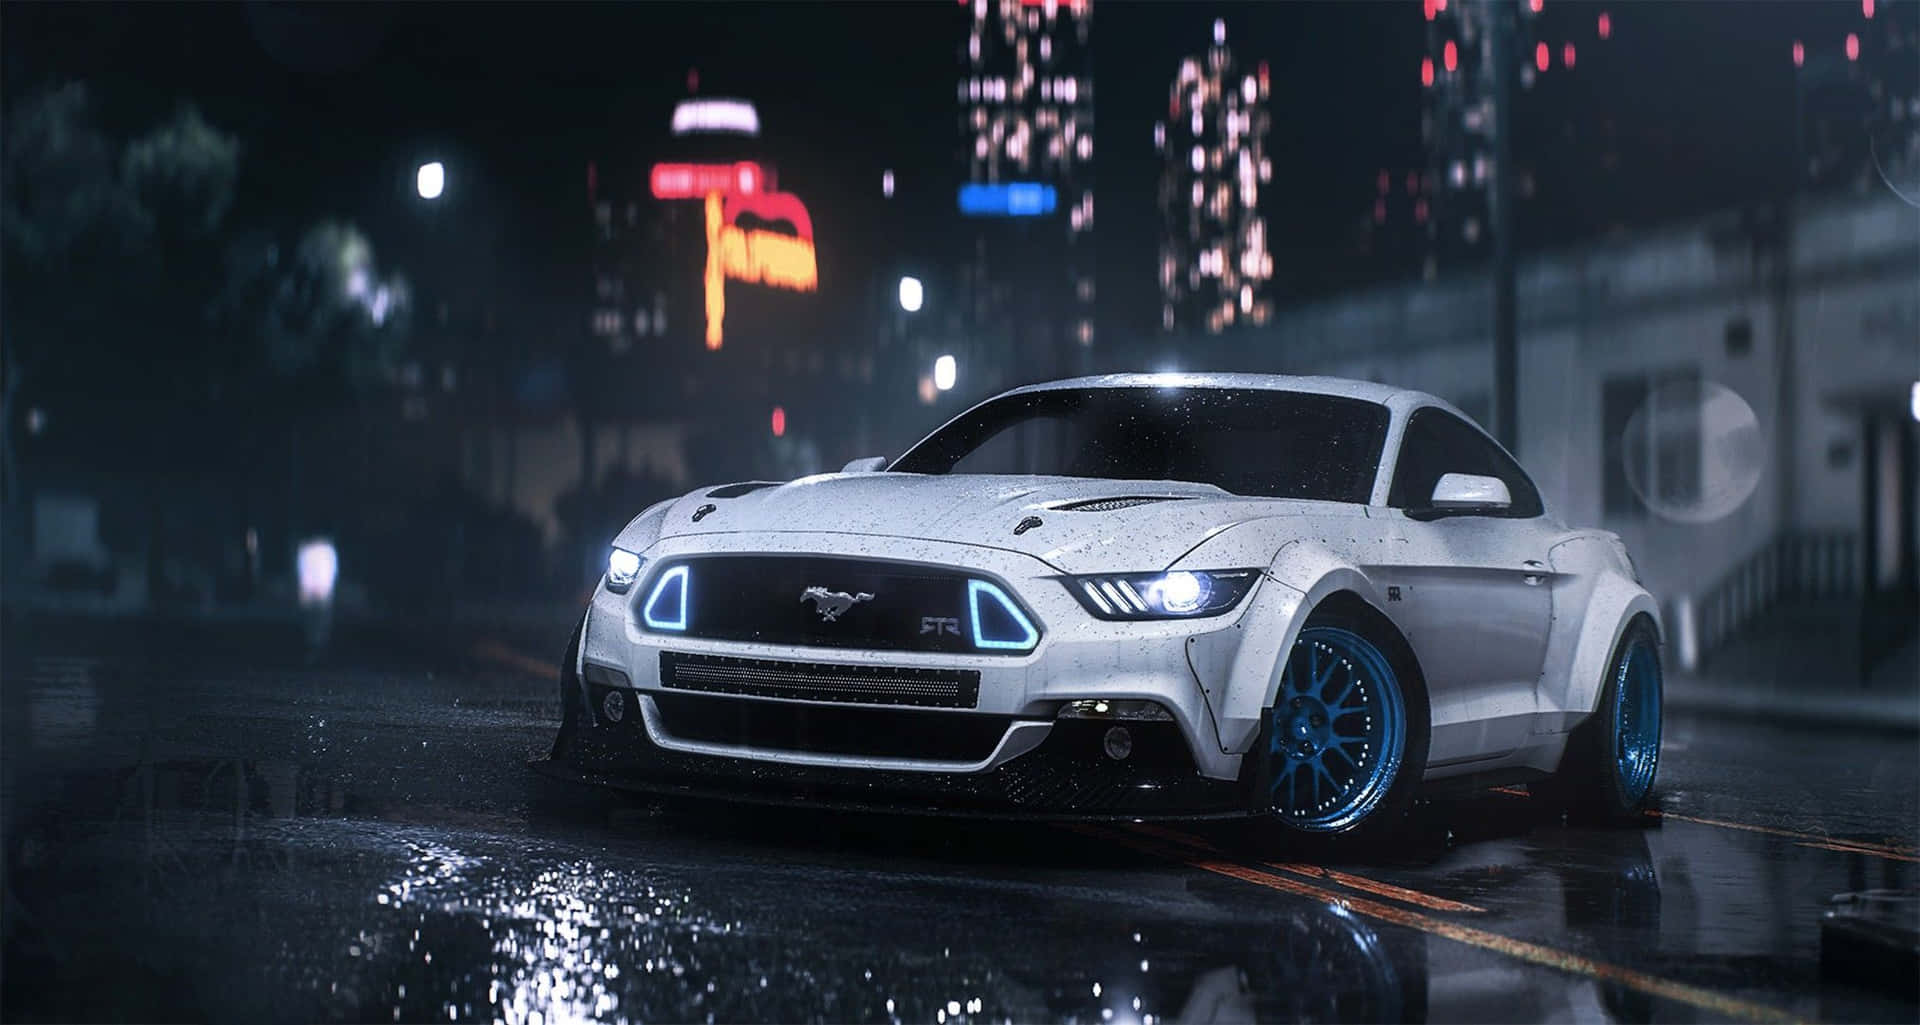 Cinematic Action of Need for Speed PC Game Wallpaper